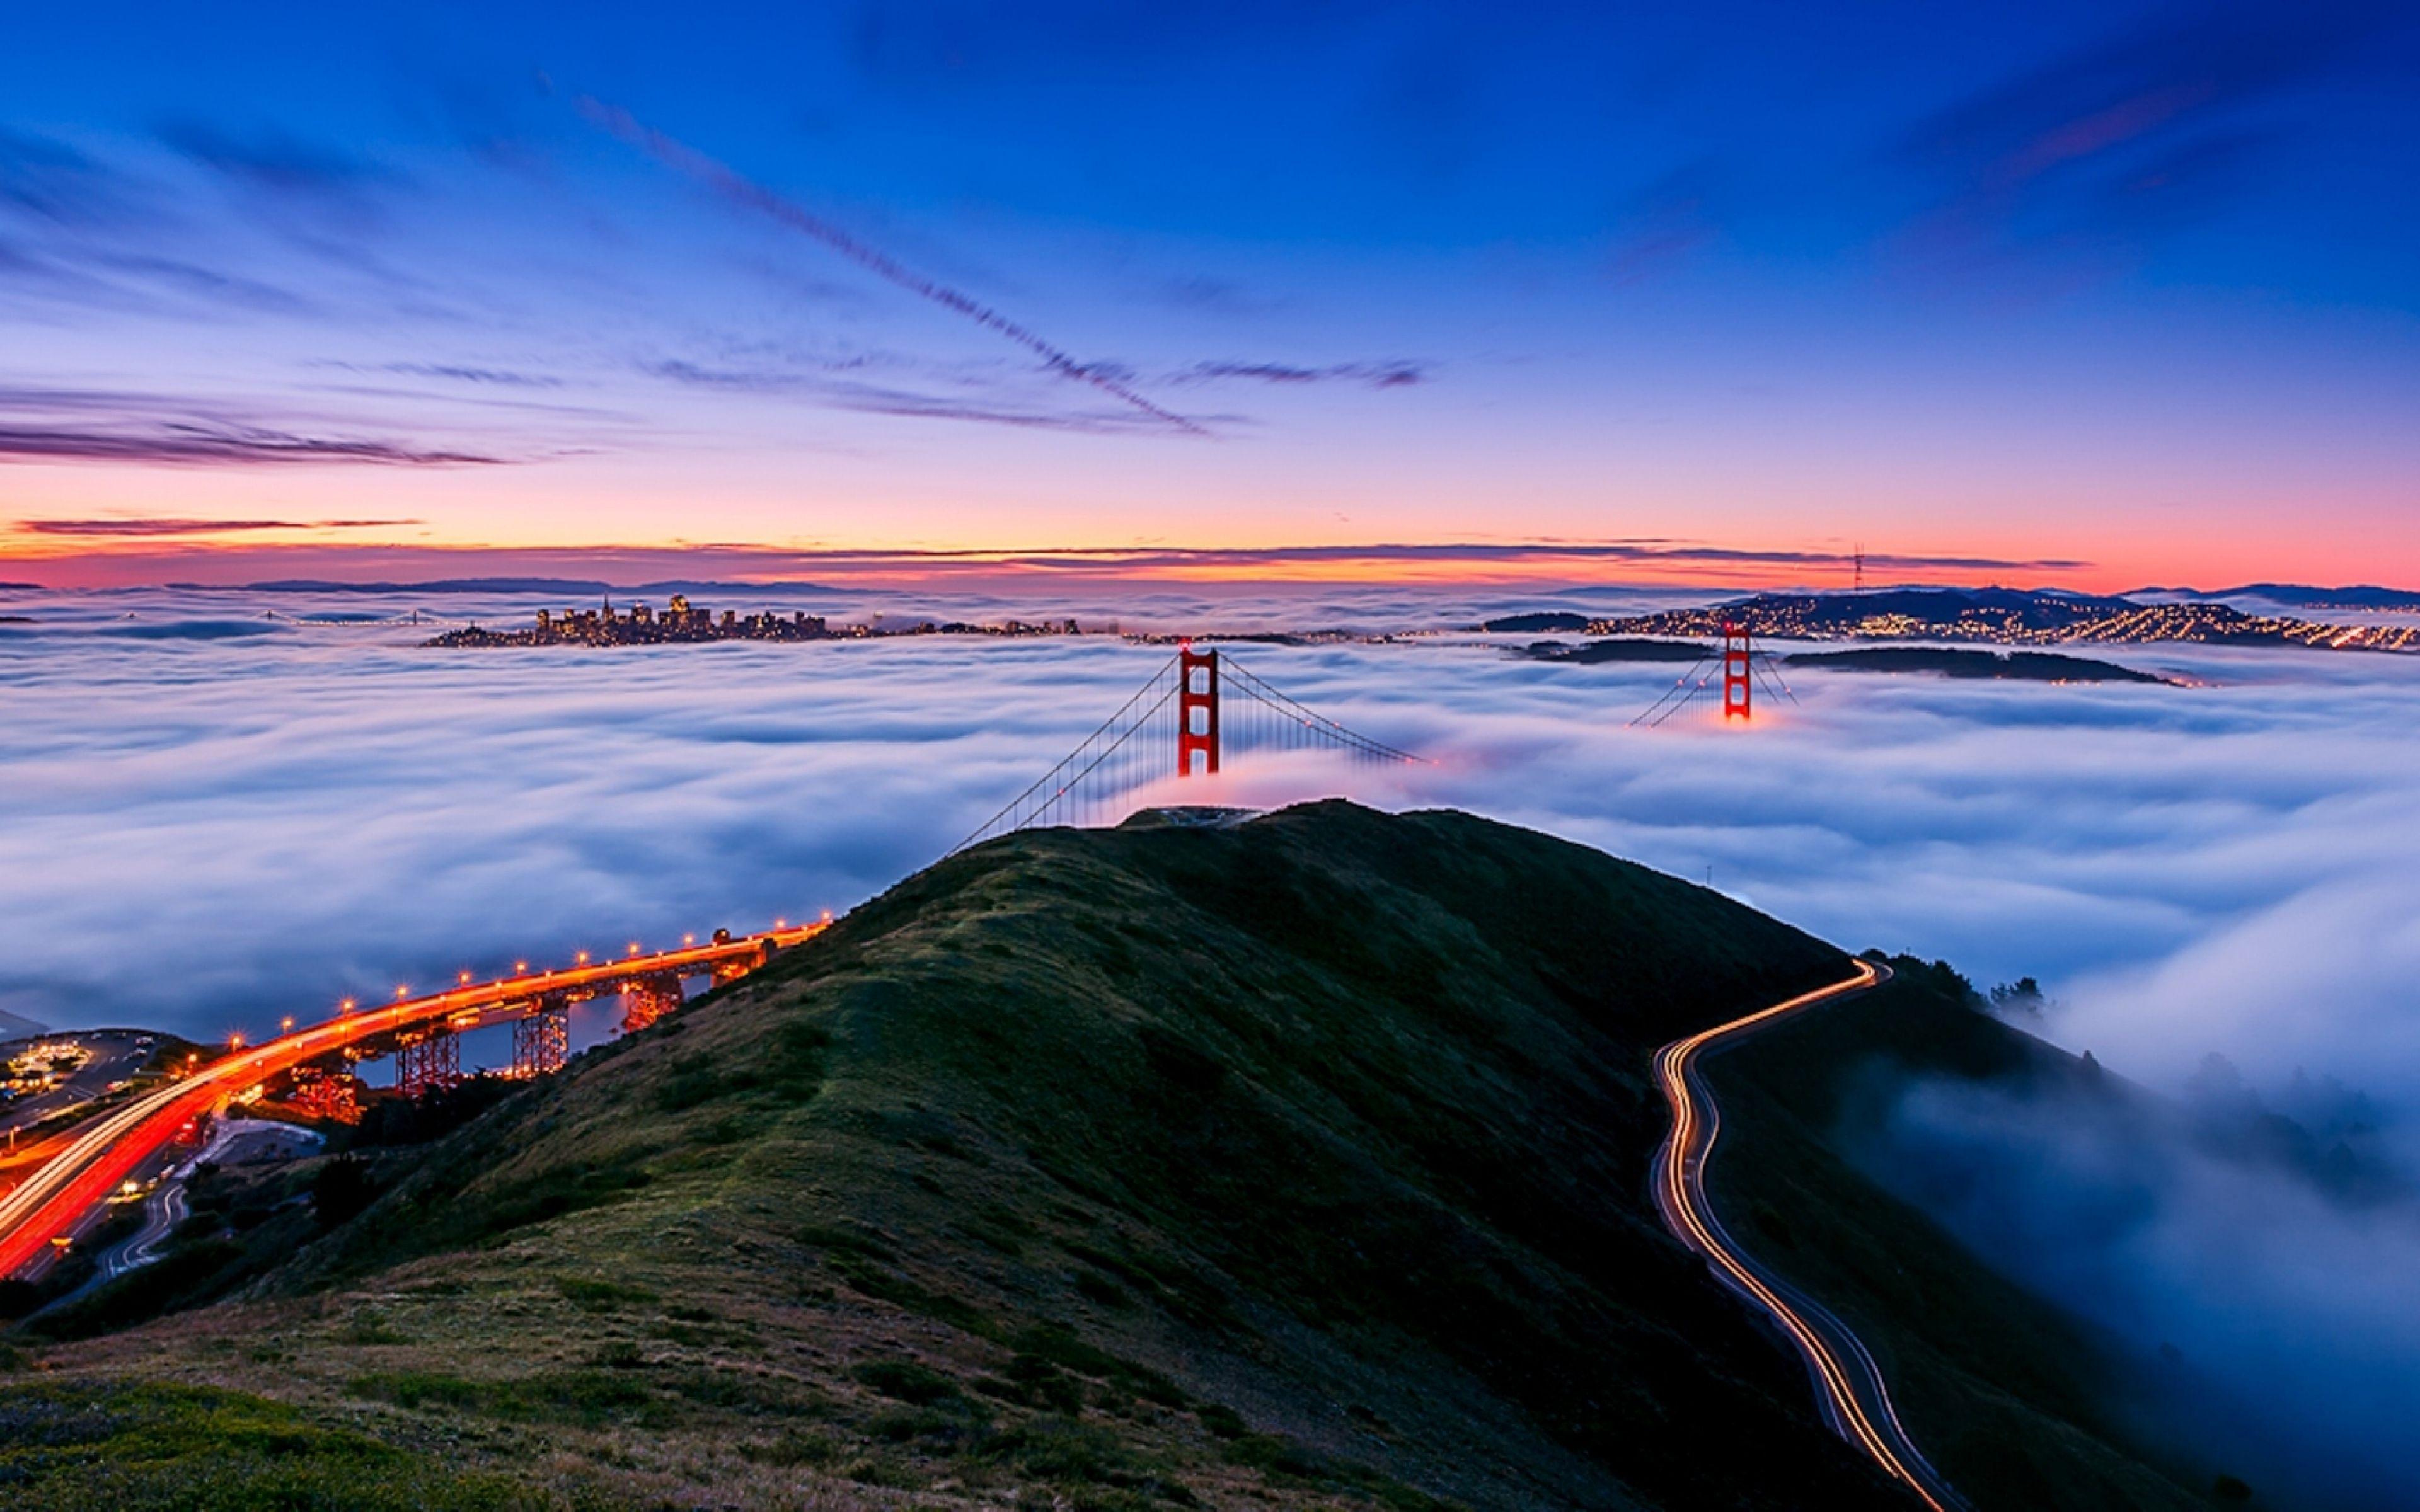 San Francisco Gallery of Wallpaper. Free Download For Android